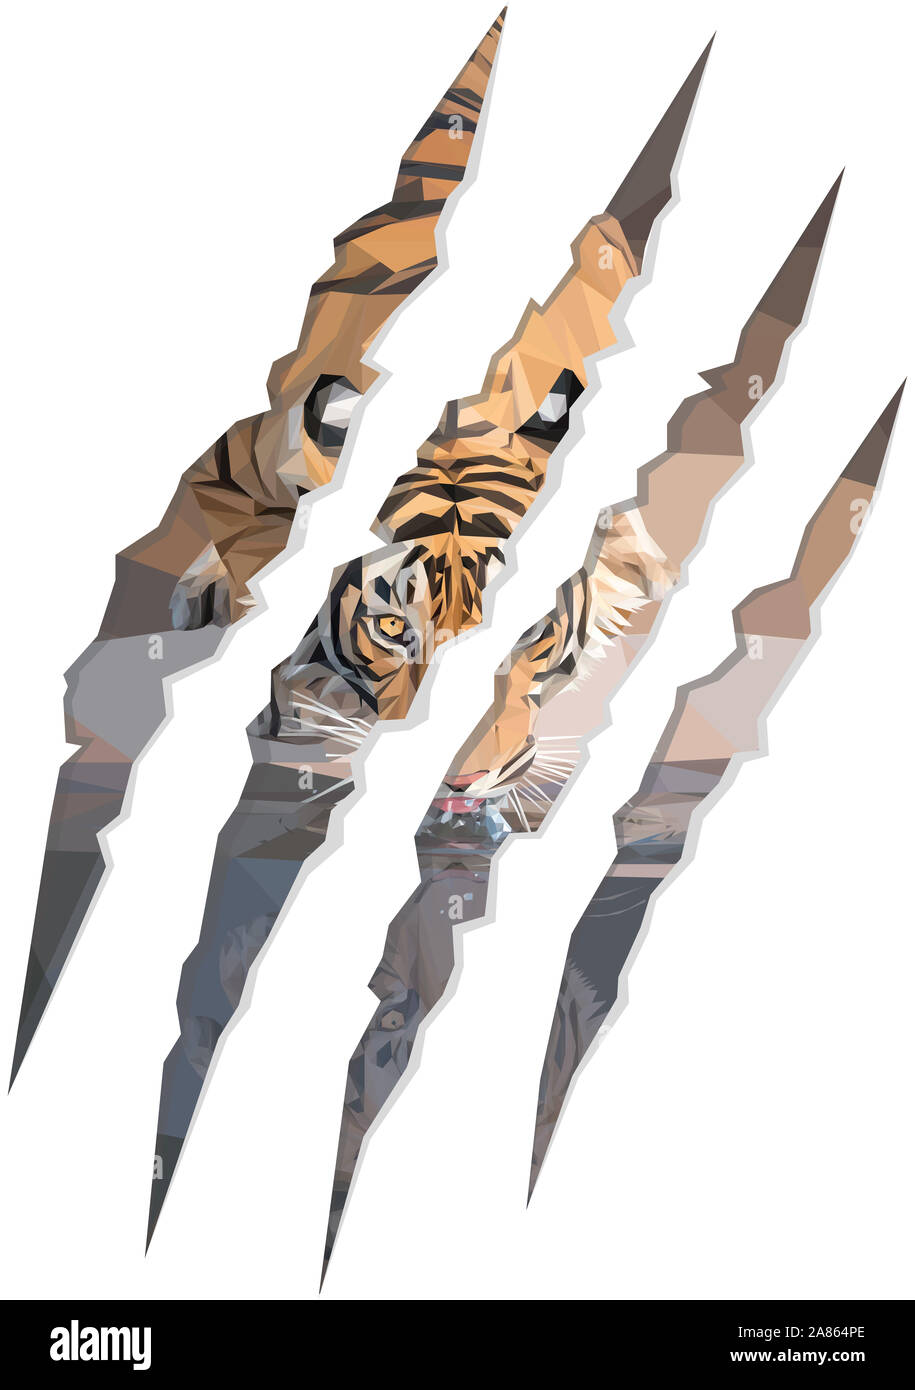 Low poly illustration of a tiger drinking water inside of claw marks Stock Photo